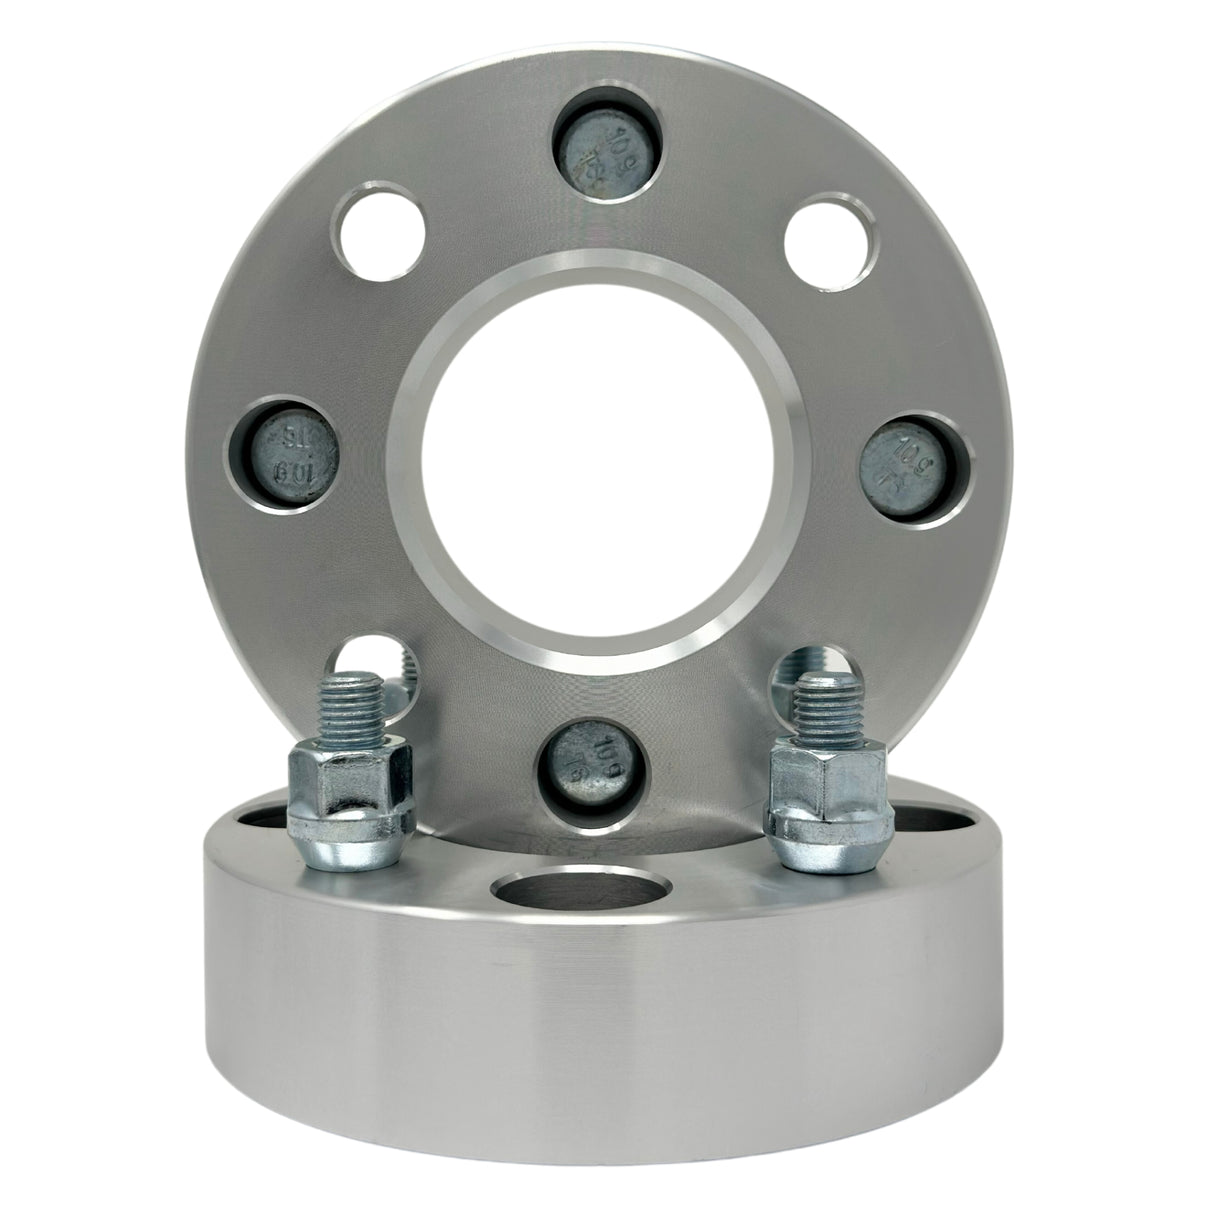 4x108 Wheel Spacers 1" Inch Thick (25mm) 12x1.5 Studs & Lug Nuts 71mm Center Bore For All Vehicle Hub Clearance